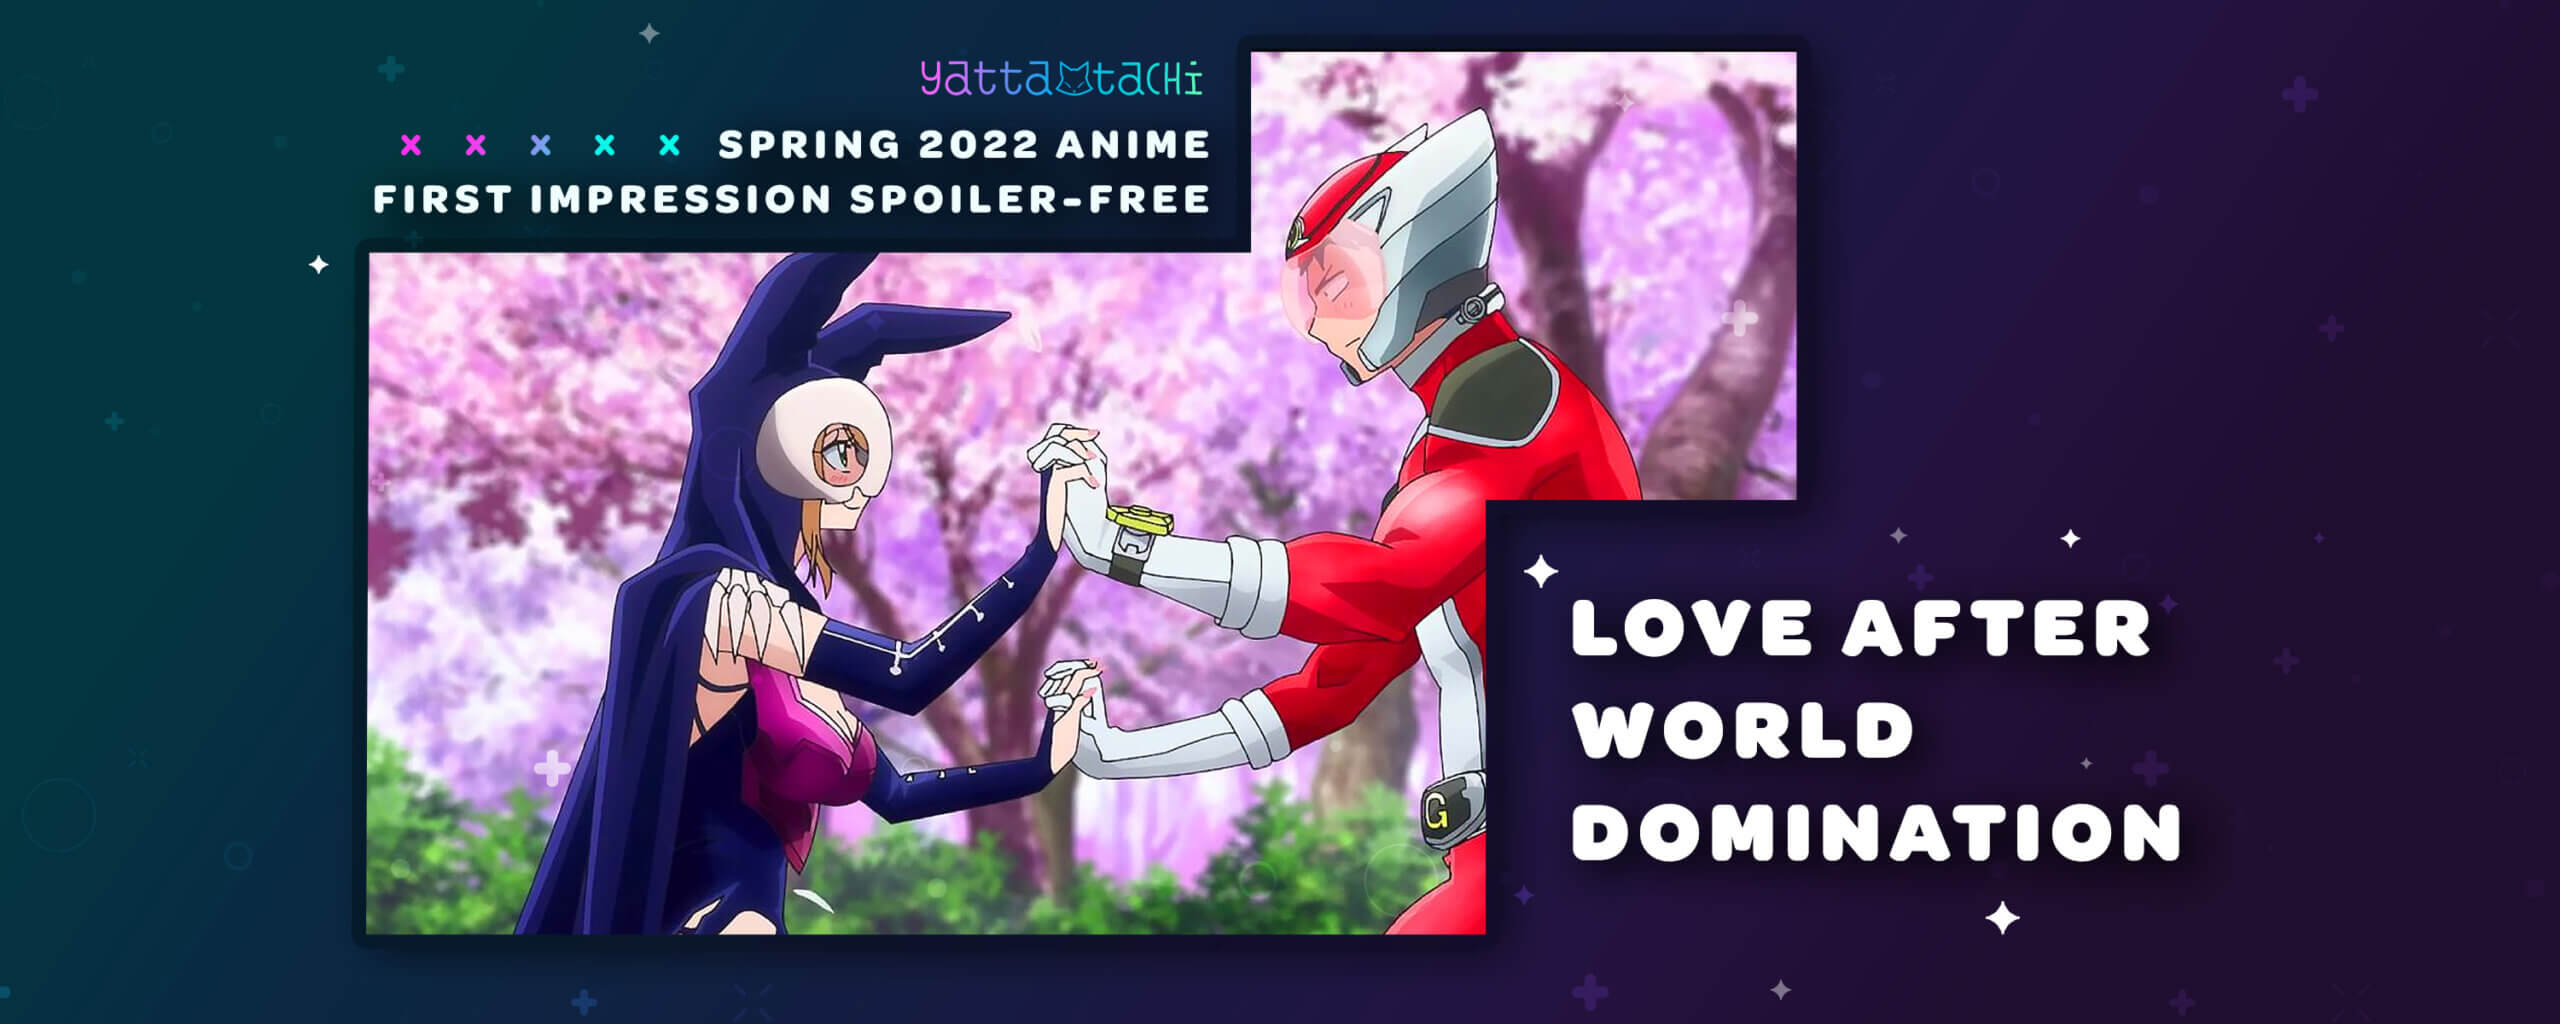 Love After World Domination Drops Trailer, Announces Release Date